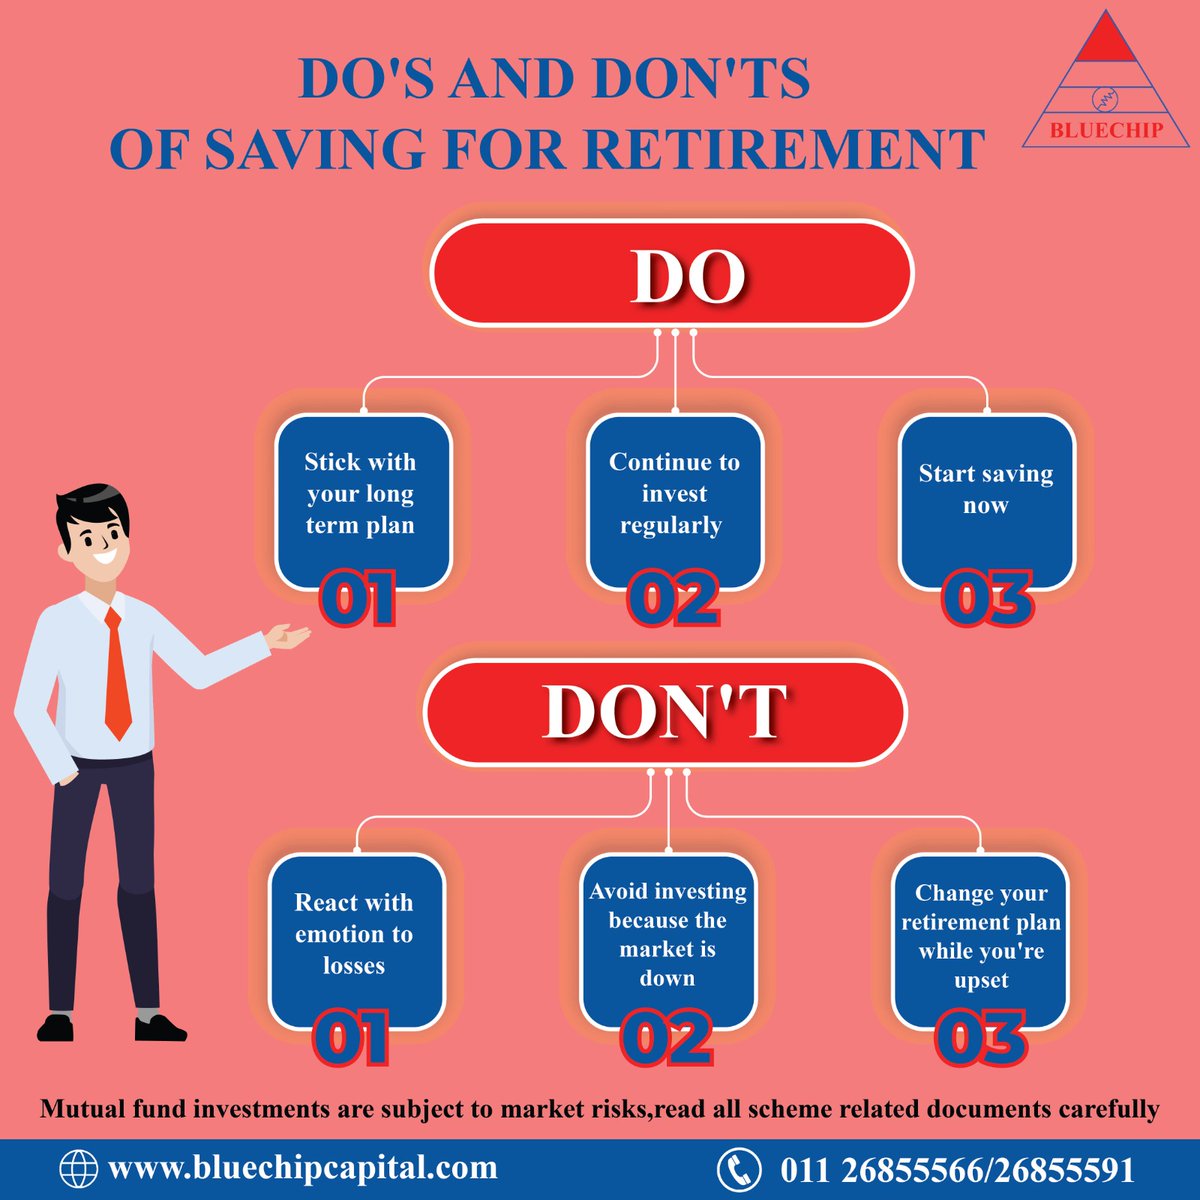 DO'S AND DON'TS OF SAVING FOR RETIREMENT

Call us today for details information
☎ 011 – 26855566 / 26967686

#bluechipcapital #FinancialPlanning #Investment #moneysavingtips #sip #WealthCreation  #Invest #savemoney #goal #health #regularly #saving #termplan #retirement